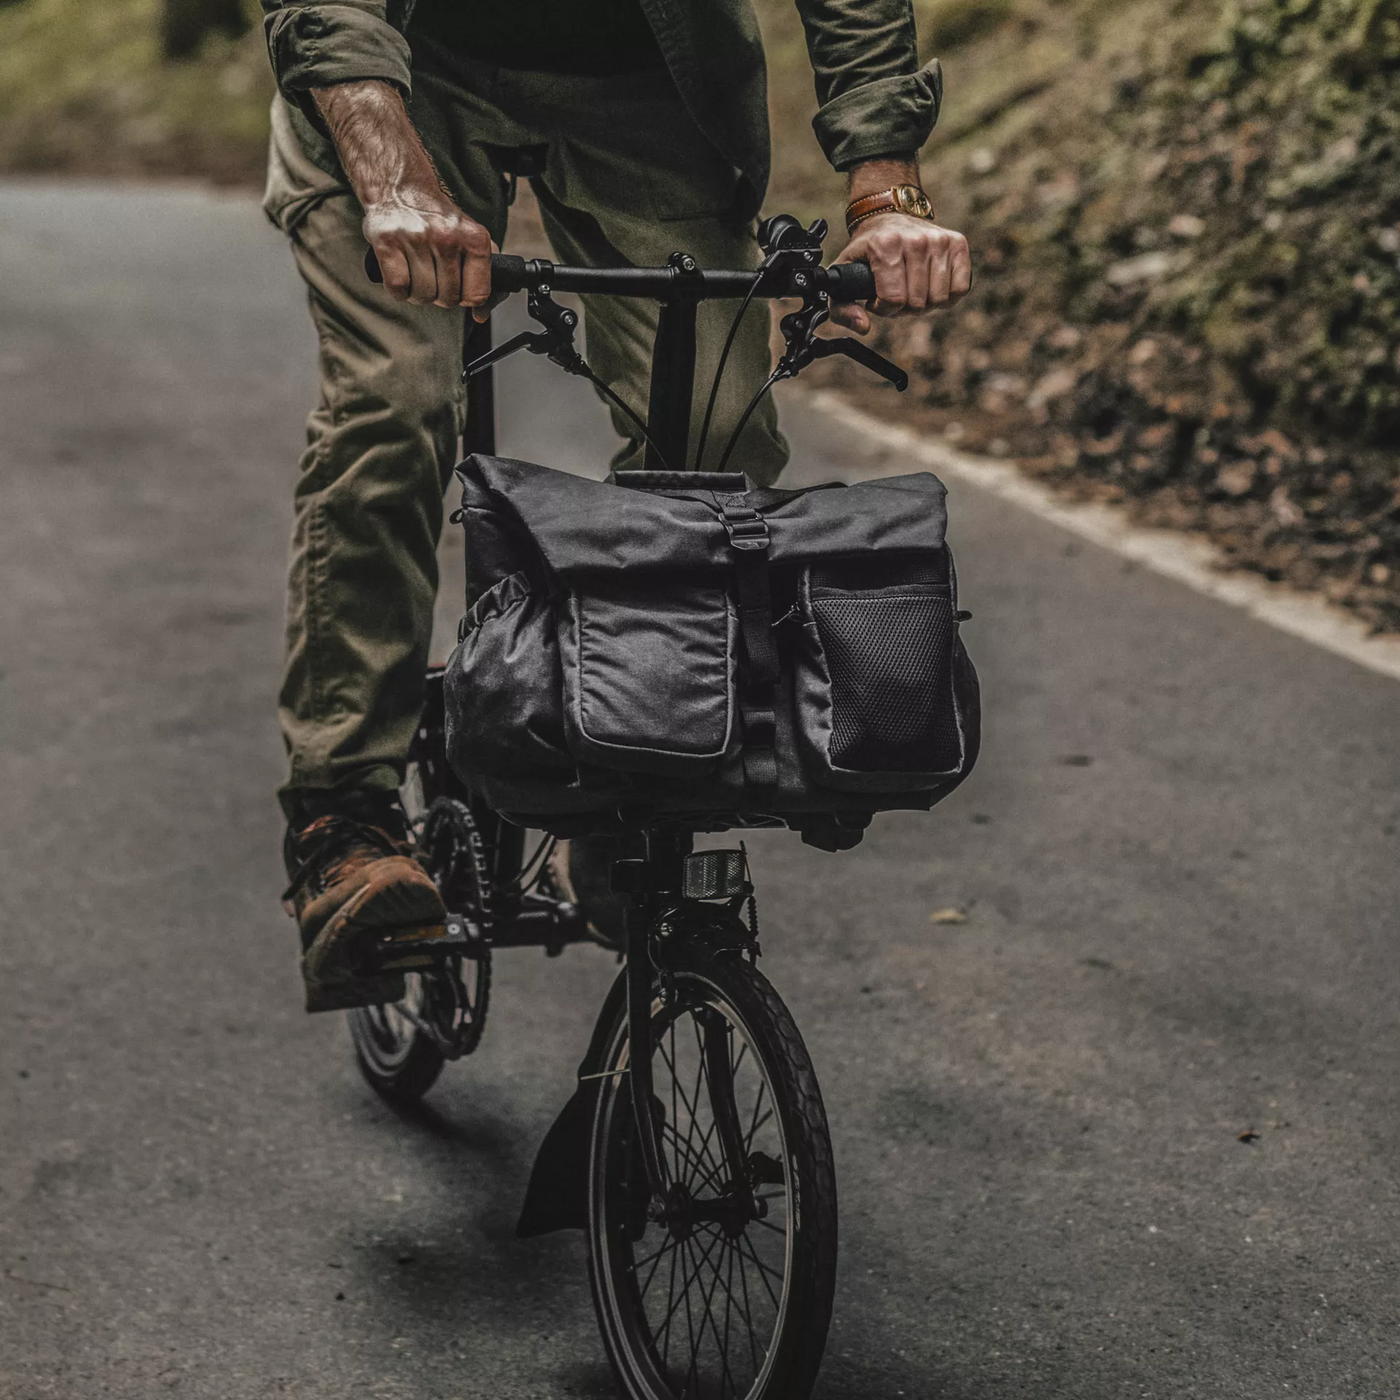 Wotancraft - Pilot Brompton Bag 10L | With 2 pouch modules (Carrier Frame not included)